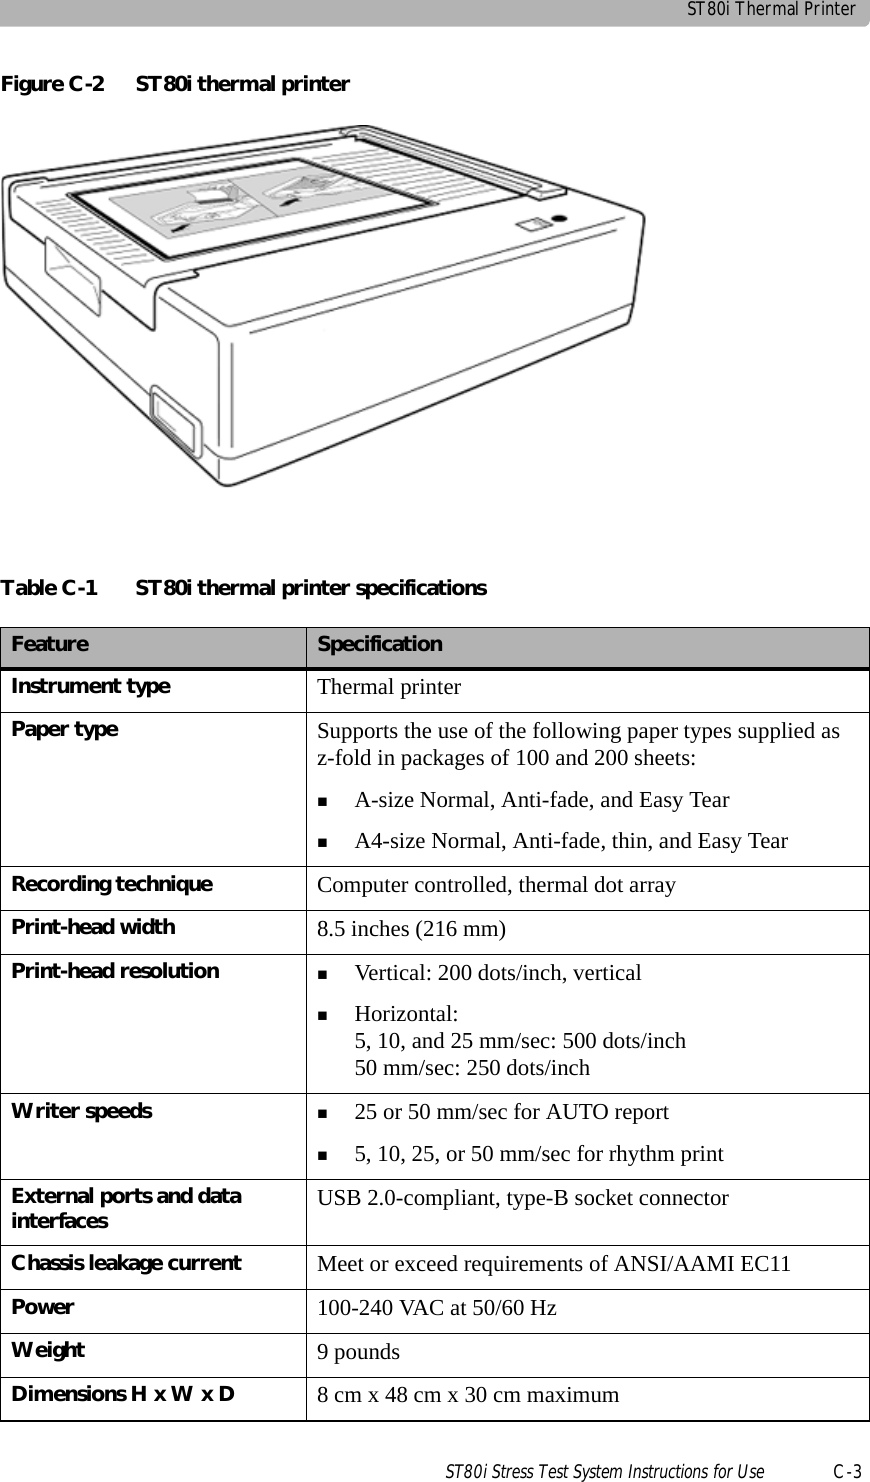 ST80i Thermal PrinterST80i Stress Test System Instructions for Use C-3Figure C-2 ST80i thermal printerTable C-1 ST80i thermal printer specifications Feature SpecificationInstrument type Thermal printerPaper type Supports the use of the following paper types supplied as z-fold in packages of 100 and 200 sheets:A-size Normal, Anti-fade, and Easy TearA4-size Normal, Anti-fade, thin, and Easy TearRecording technique Computer controlled, thermal dot arrayPrint-head width 8.5 inches (216 mm)Print-head resolution Vertical: 200 dots/inch, verticalHorizontal:5, 10, and 25 mm/sec: 500 dots/inch50 mm/sec: 250 dots/inchWriter speeds 25 or 50 mm/sec for AUTO report5, 10, 25, or 50 mm/sec for rhythm printExternal ports and data interfaces USB 2.0-compliant, type-B socket connectorChassis leakage current Meet or exceed requirements of ANSI/AAMI EC11Power 100-240 VAC at 50/60 HzWeight 9 poundsDimensions H x W x D 8 cm x 48 cm x 30 cm maximum